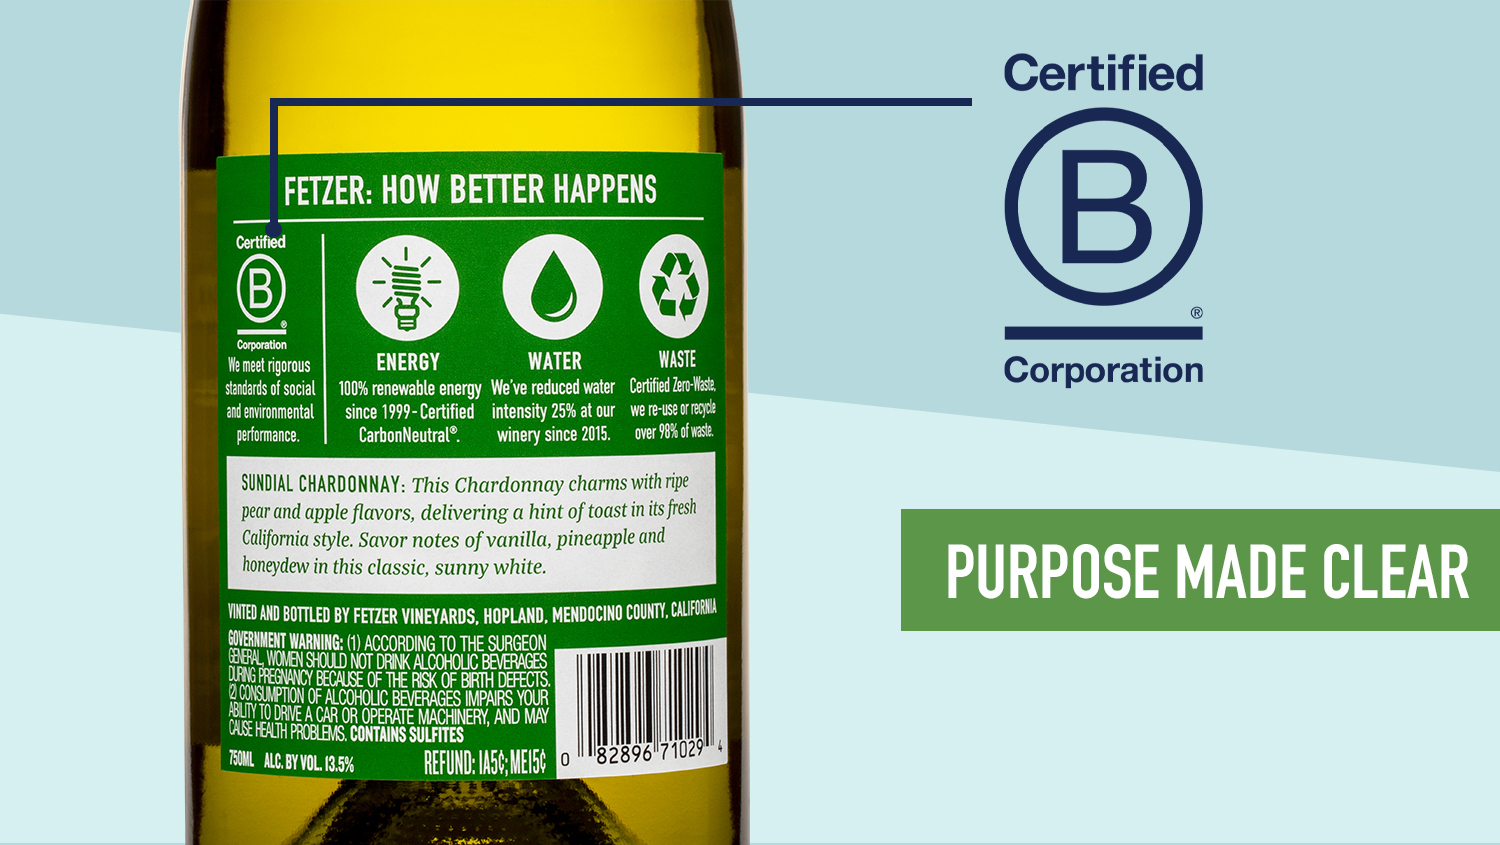 Our updated back labels make clear our purpose and responsible practices, signaling there is indeed a path forward for achieving a good today and a better tomorrow!